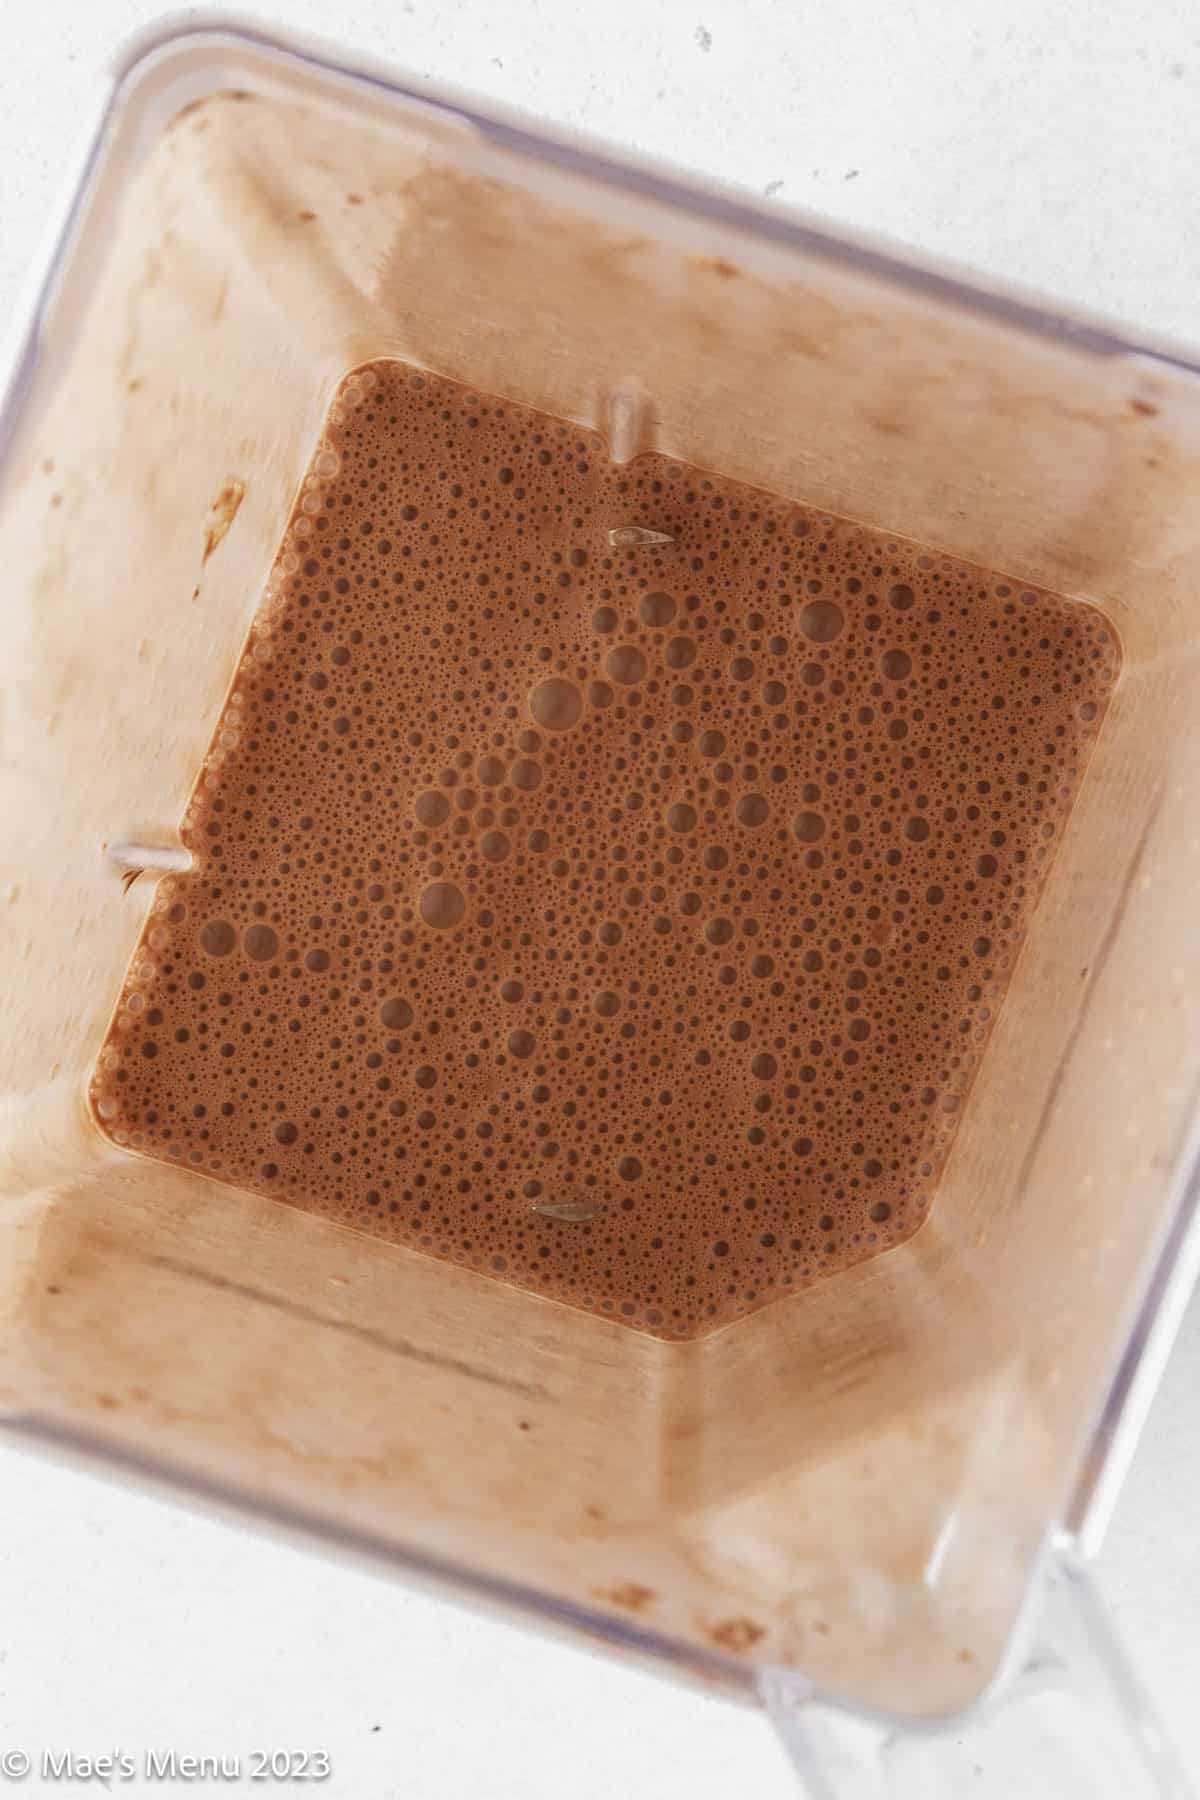 The blender of chocolate peanut butter protein shake.